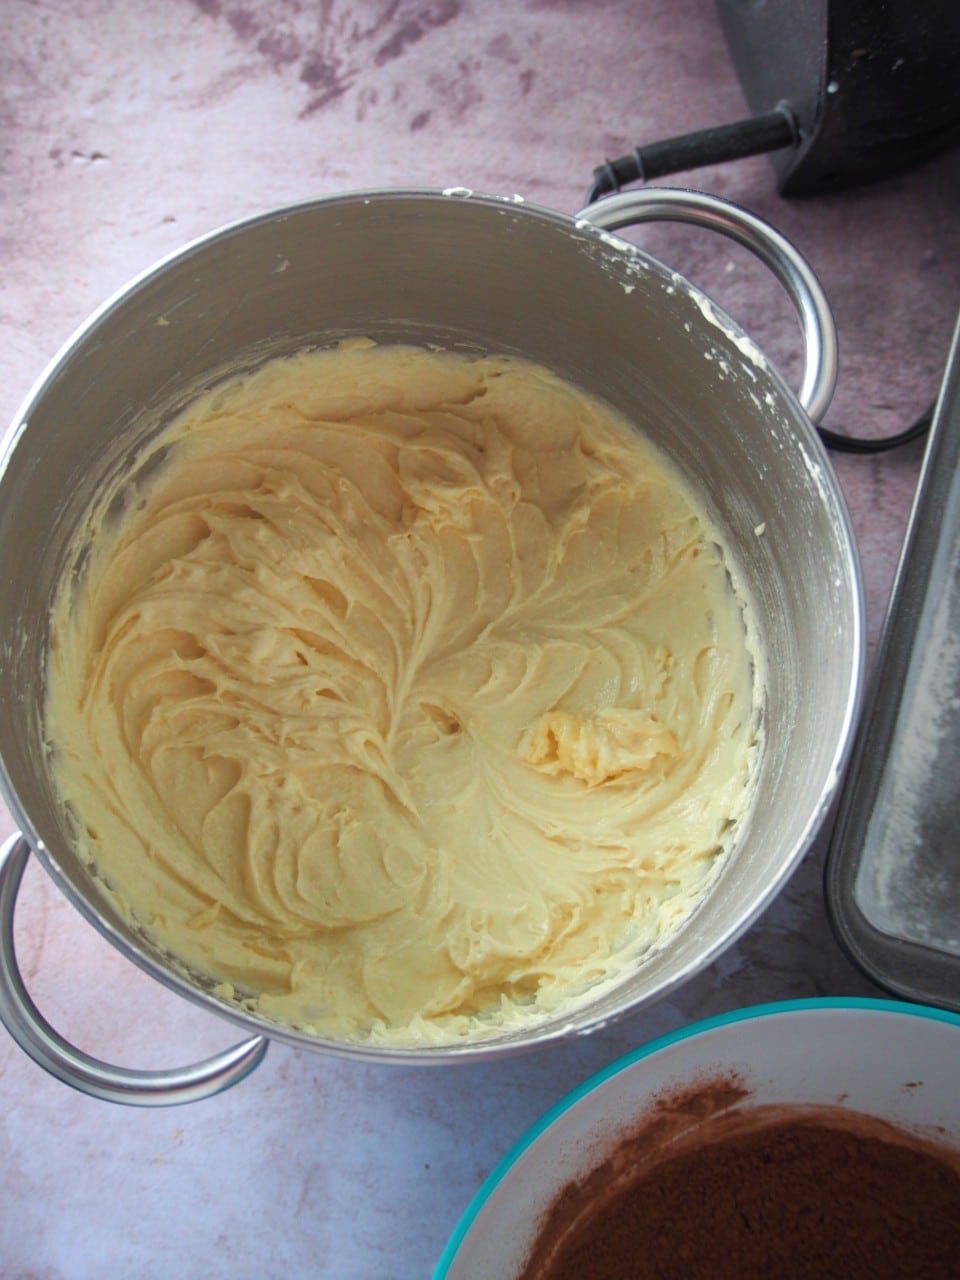 The vanilla batter for the chocolate ombre pound cake.